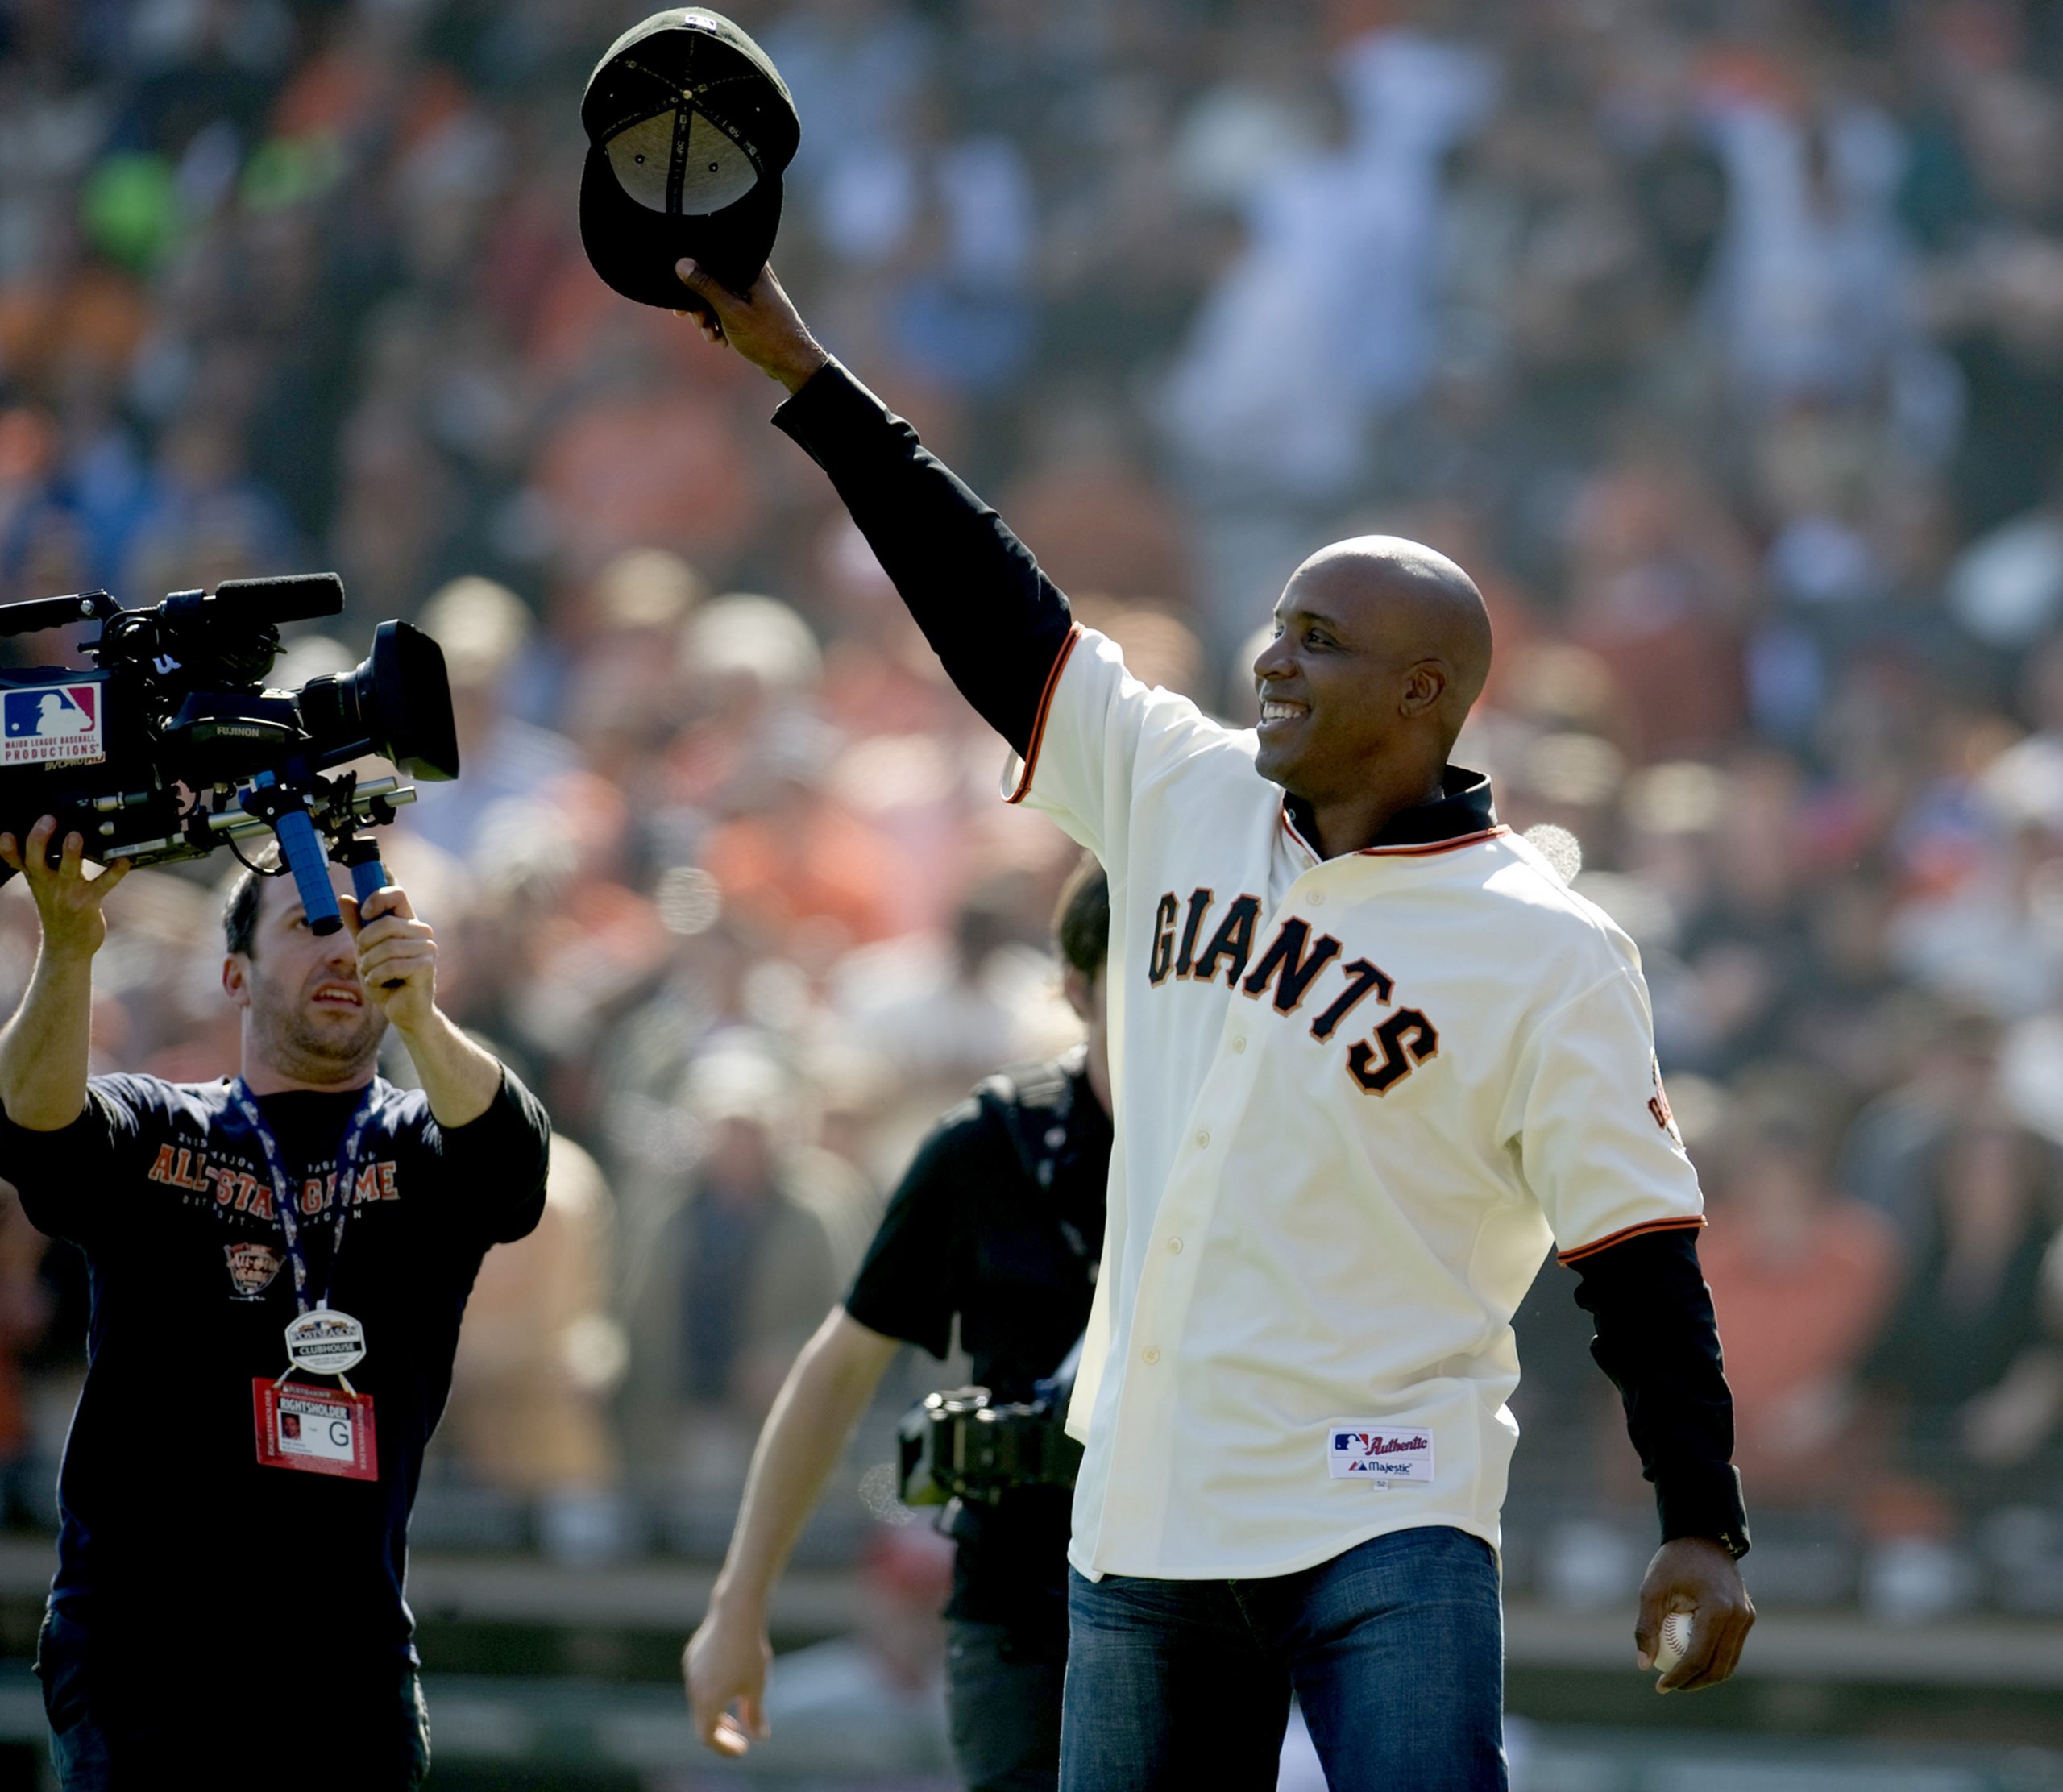 Former San Francisco Giants star Barry Bonds is all smiles after throwing out the ceremonial first pitch in 2010.